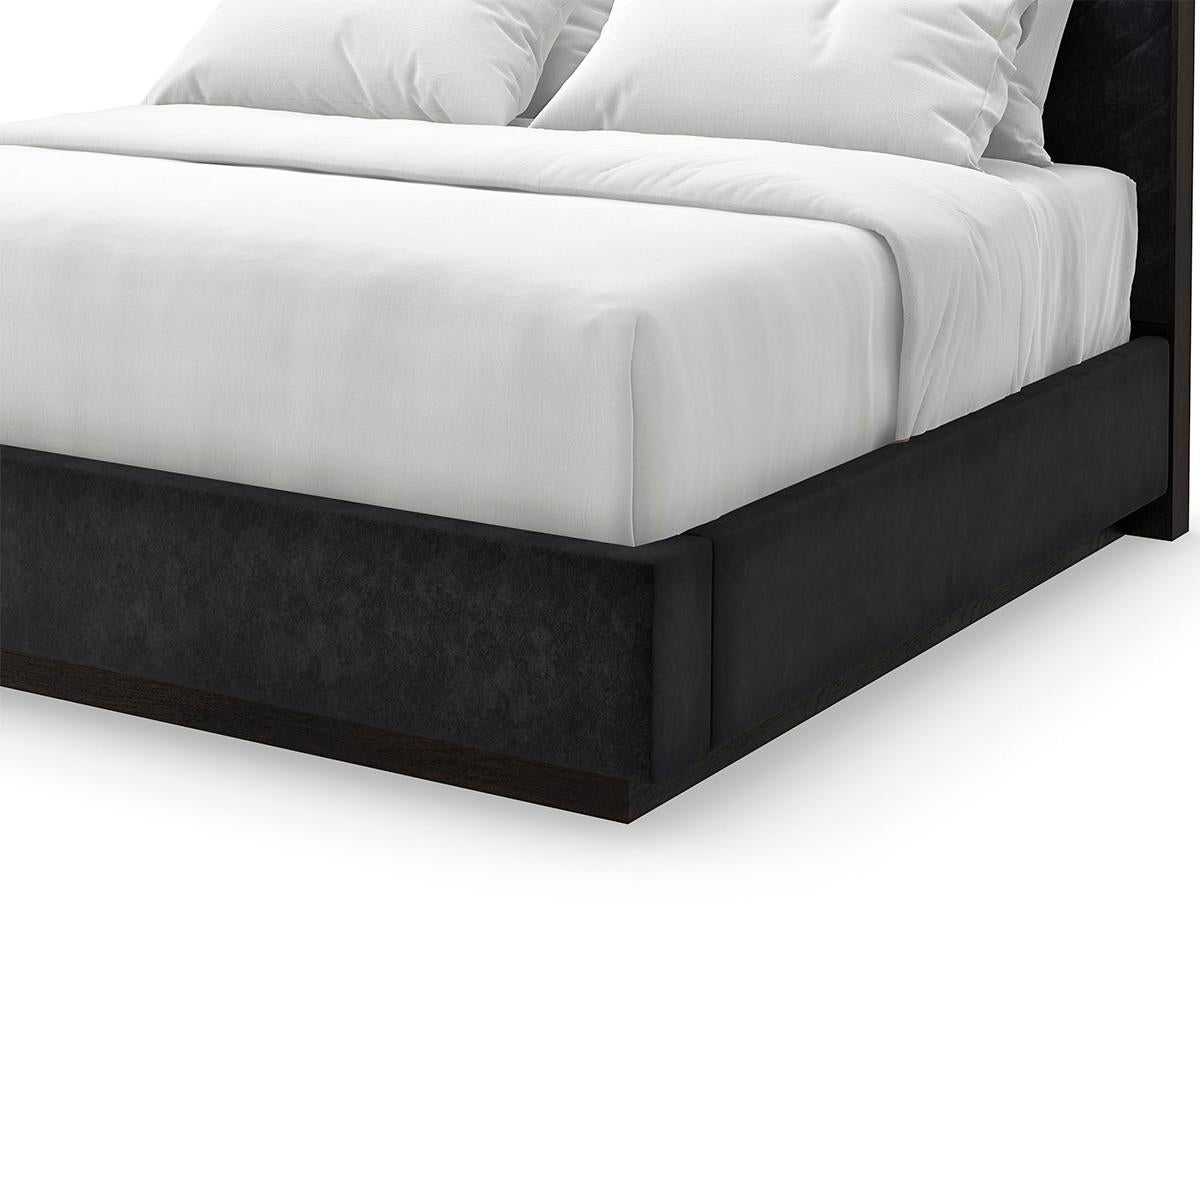 Vietnamese Black Chevron Tufted Upholstered Queen Bed For Sale